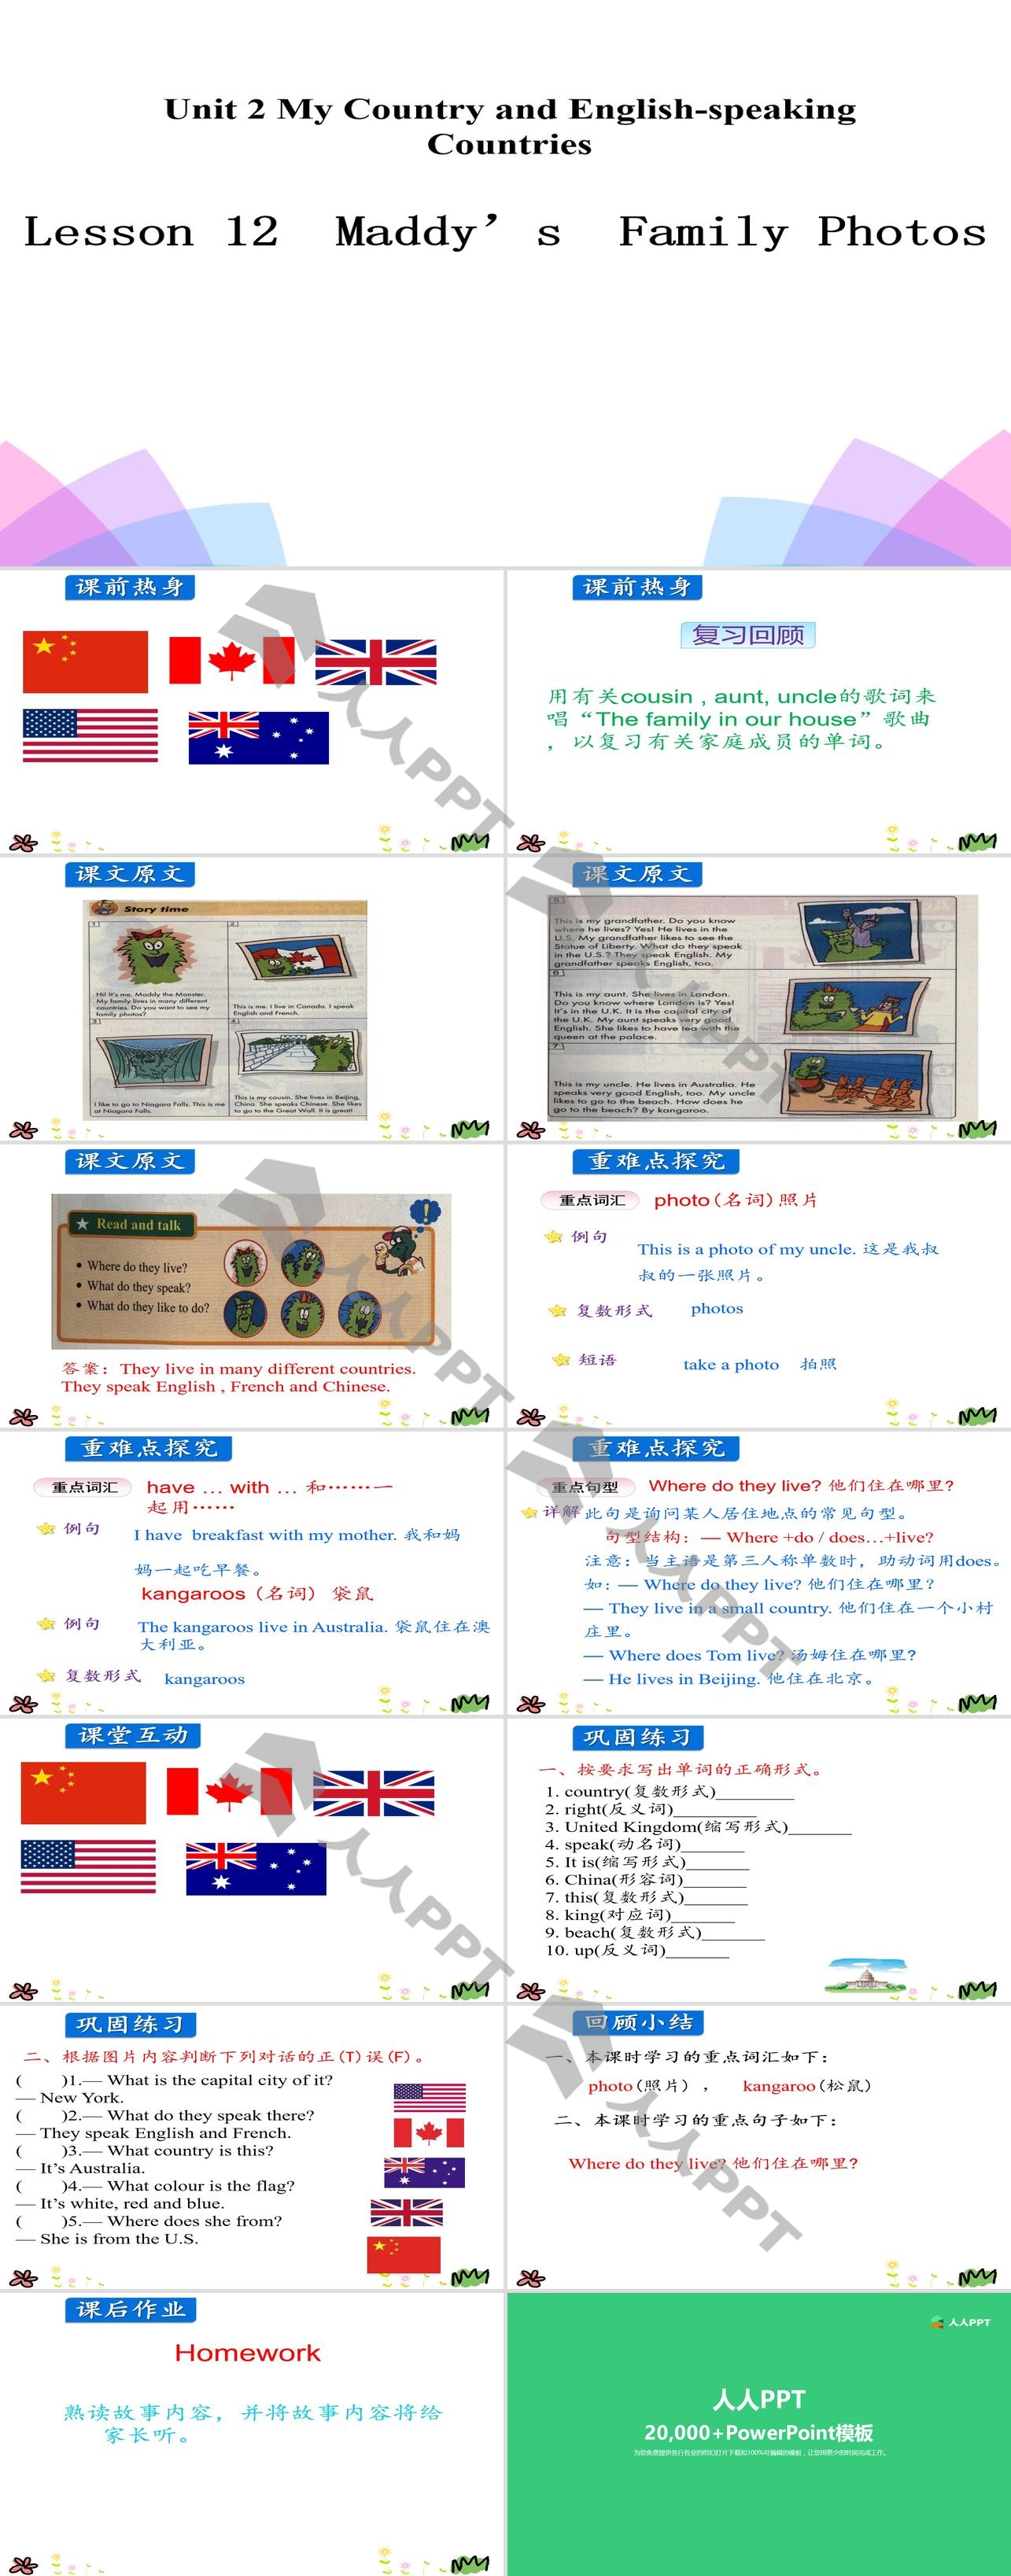 《Maddy's Family Photos》My Country and English-speaking Countries PPT长图